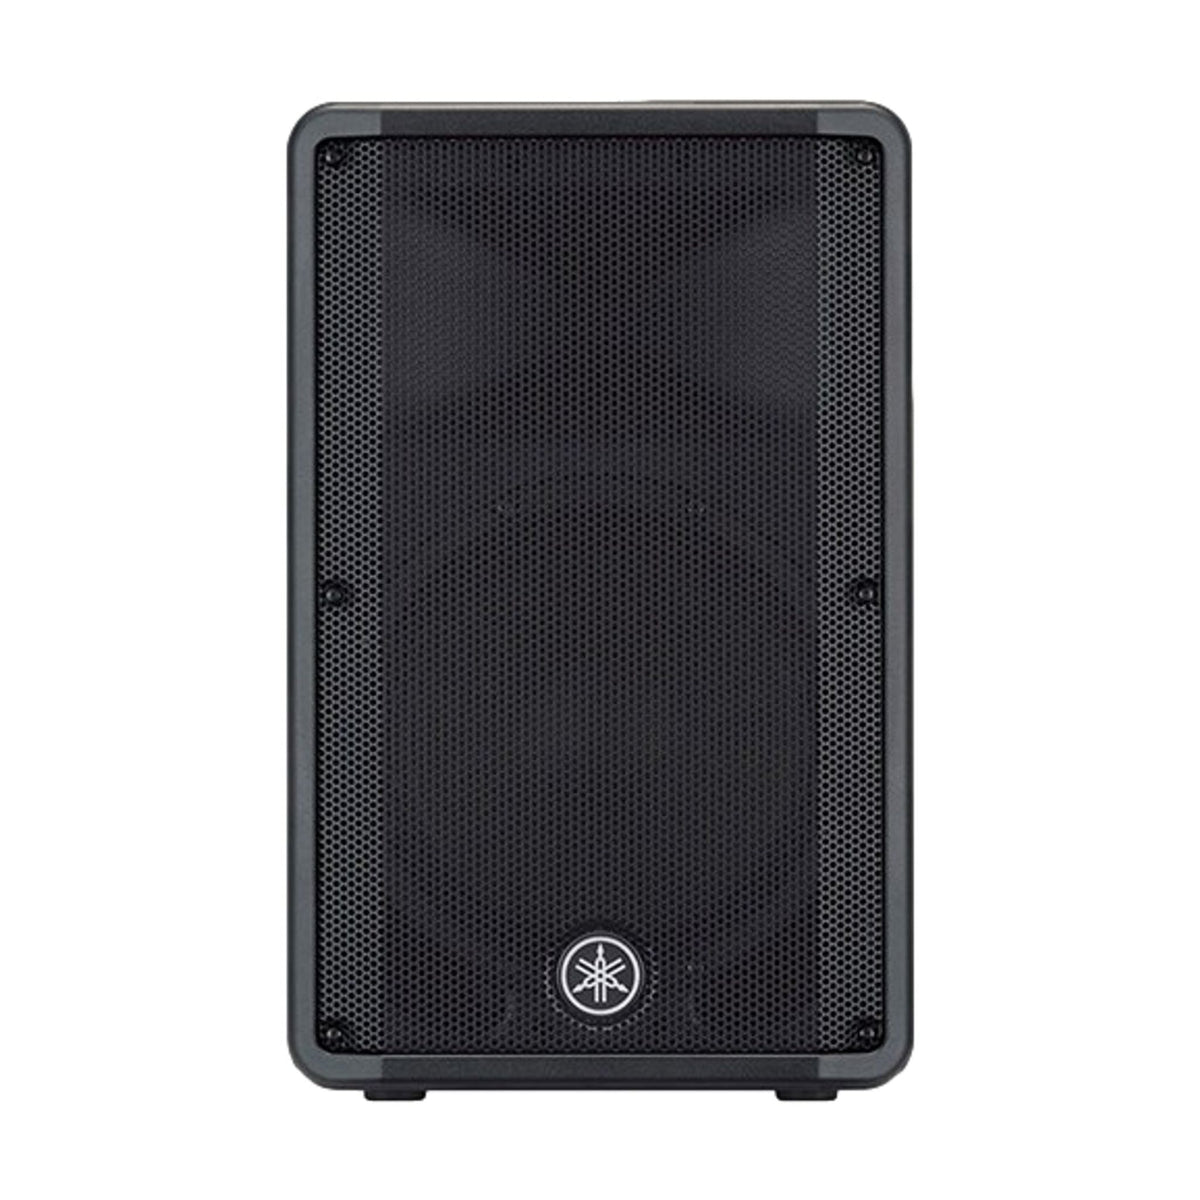 The Yamaha DBR12 Powered Speakers deliver powerful, high-quality sound with an unmatched economy of transport and setup time.